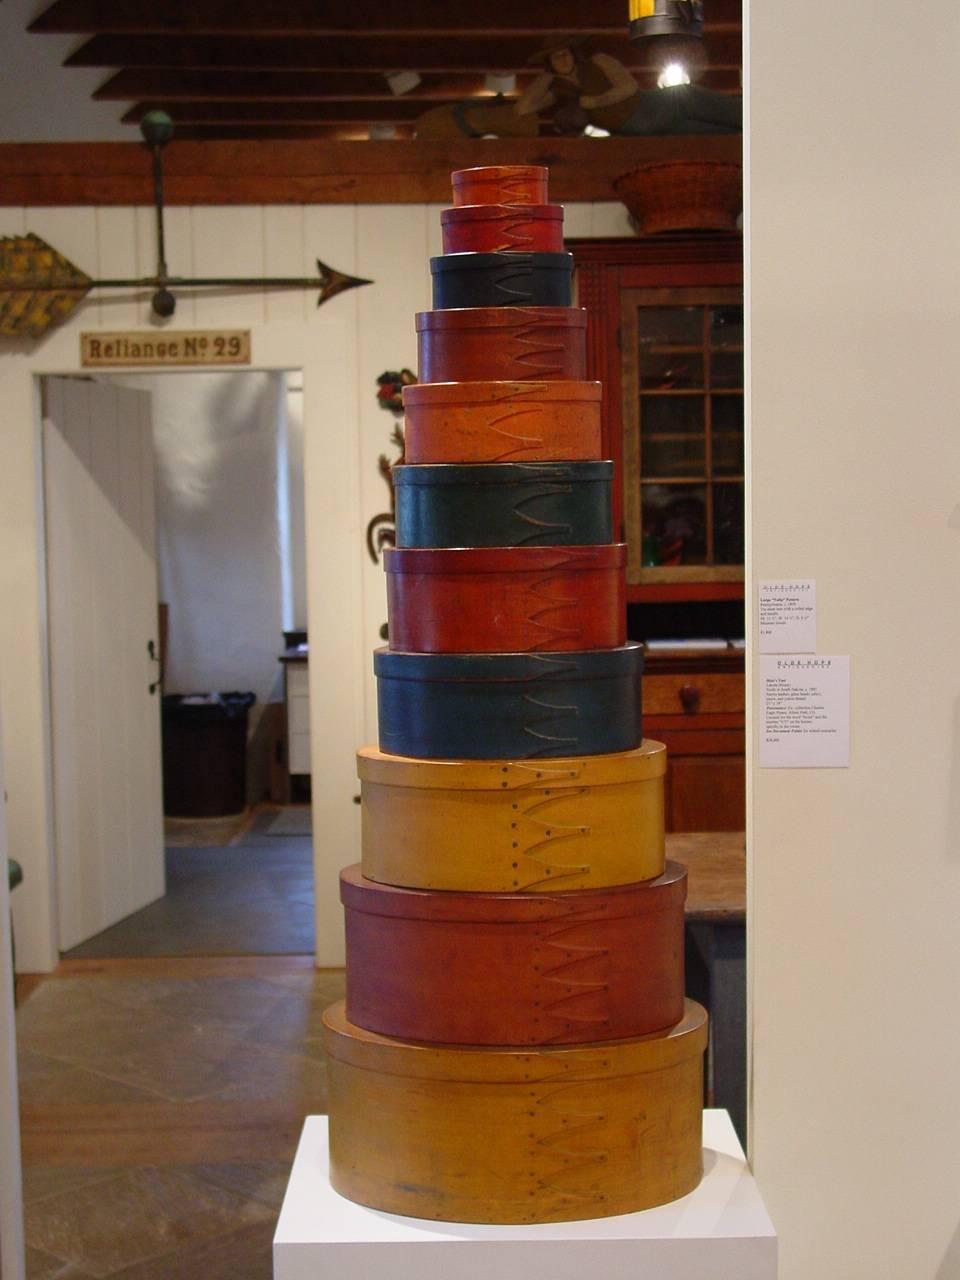 An exceptional stack of eleven Shaker finger-lapped oval boxes in a variety of original painted and stained finishes, including ochre, blue, green, salmon and red. From New England and New York communities. The 9 ¼” box from the Stokes Collection